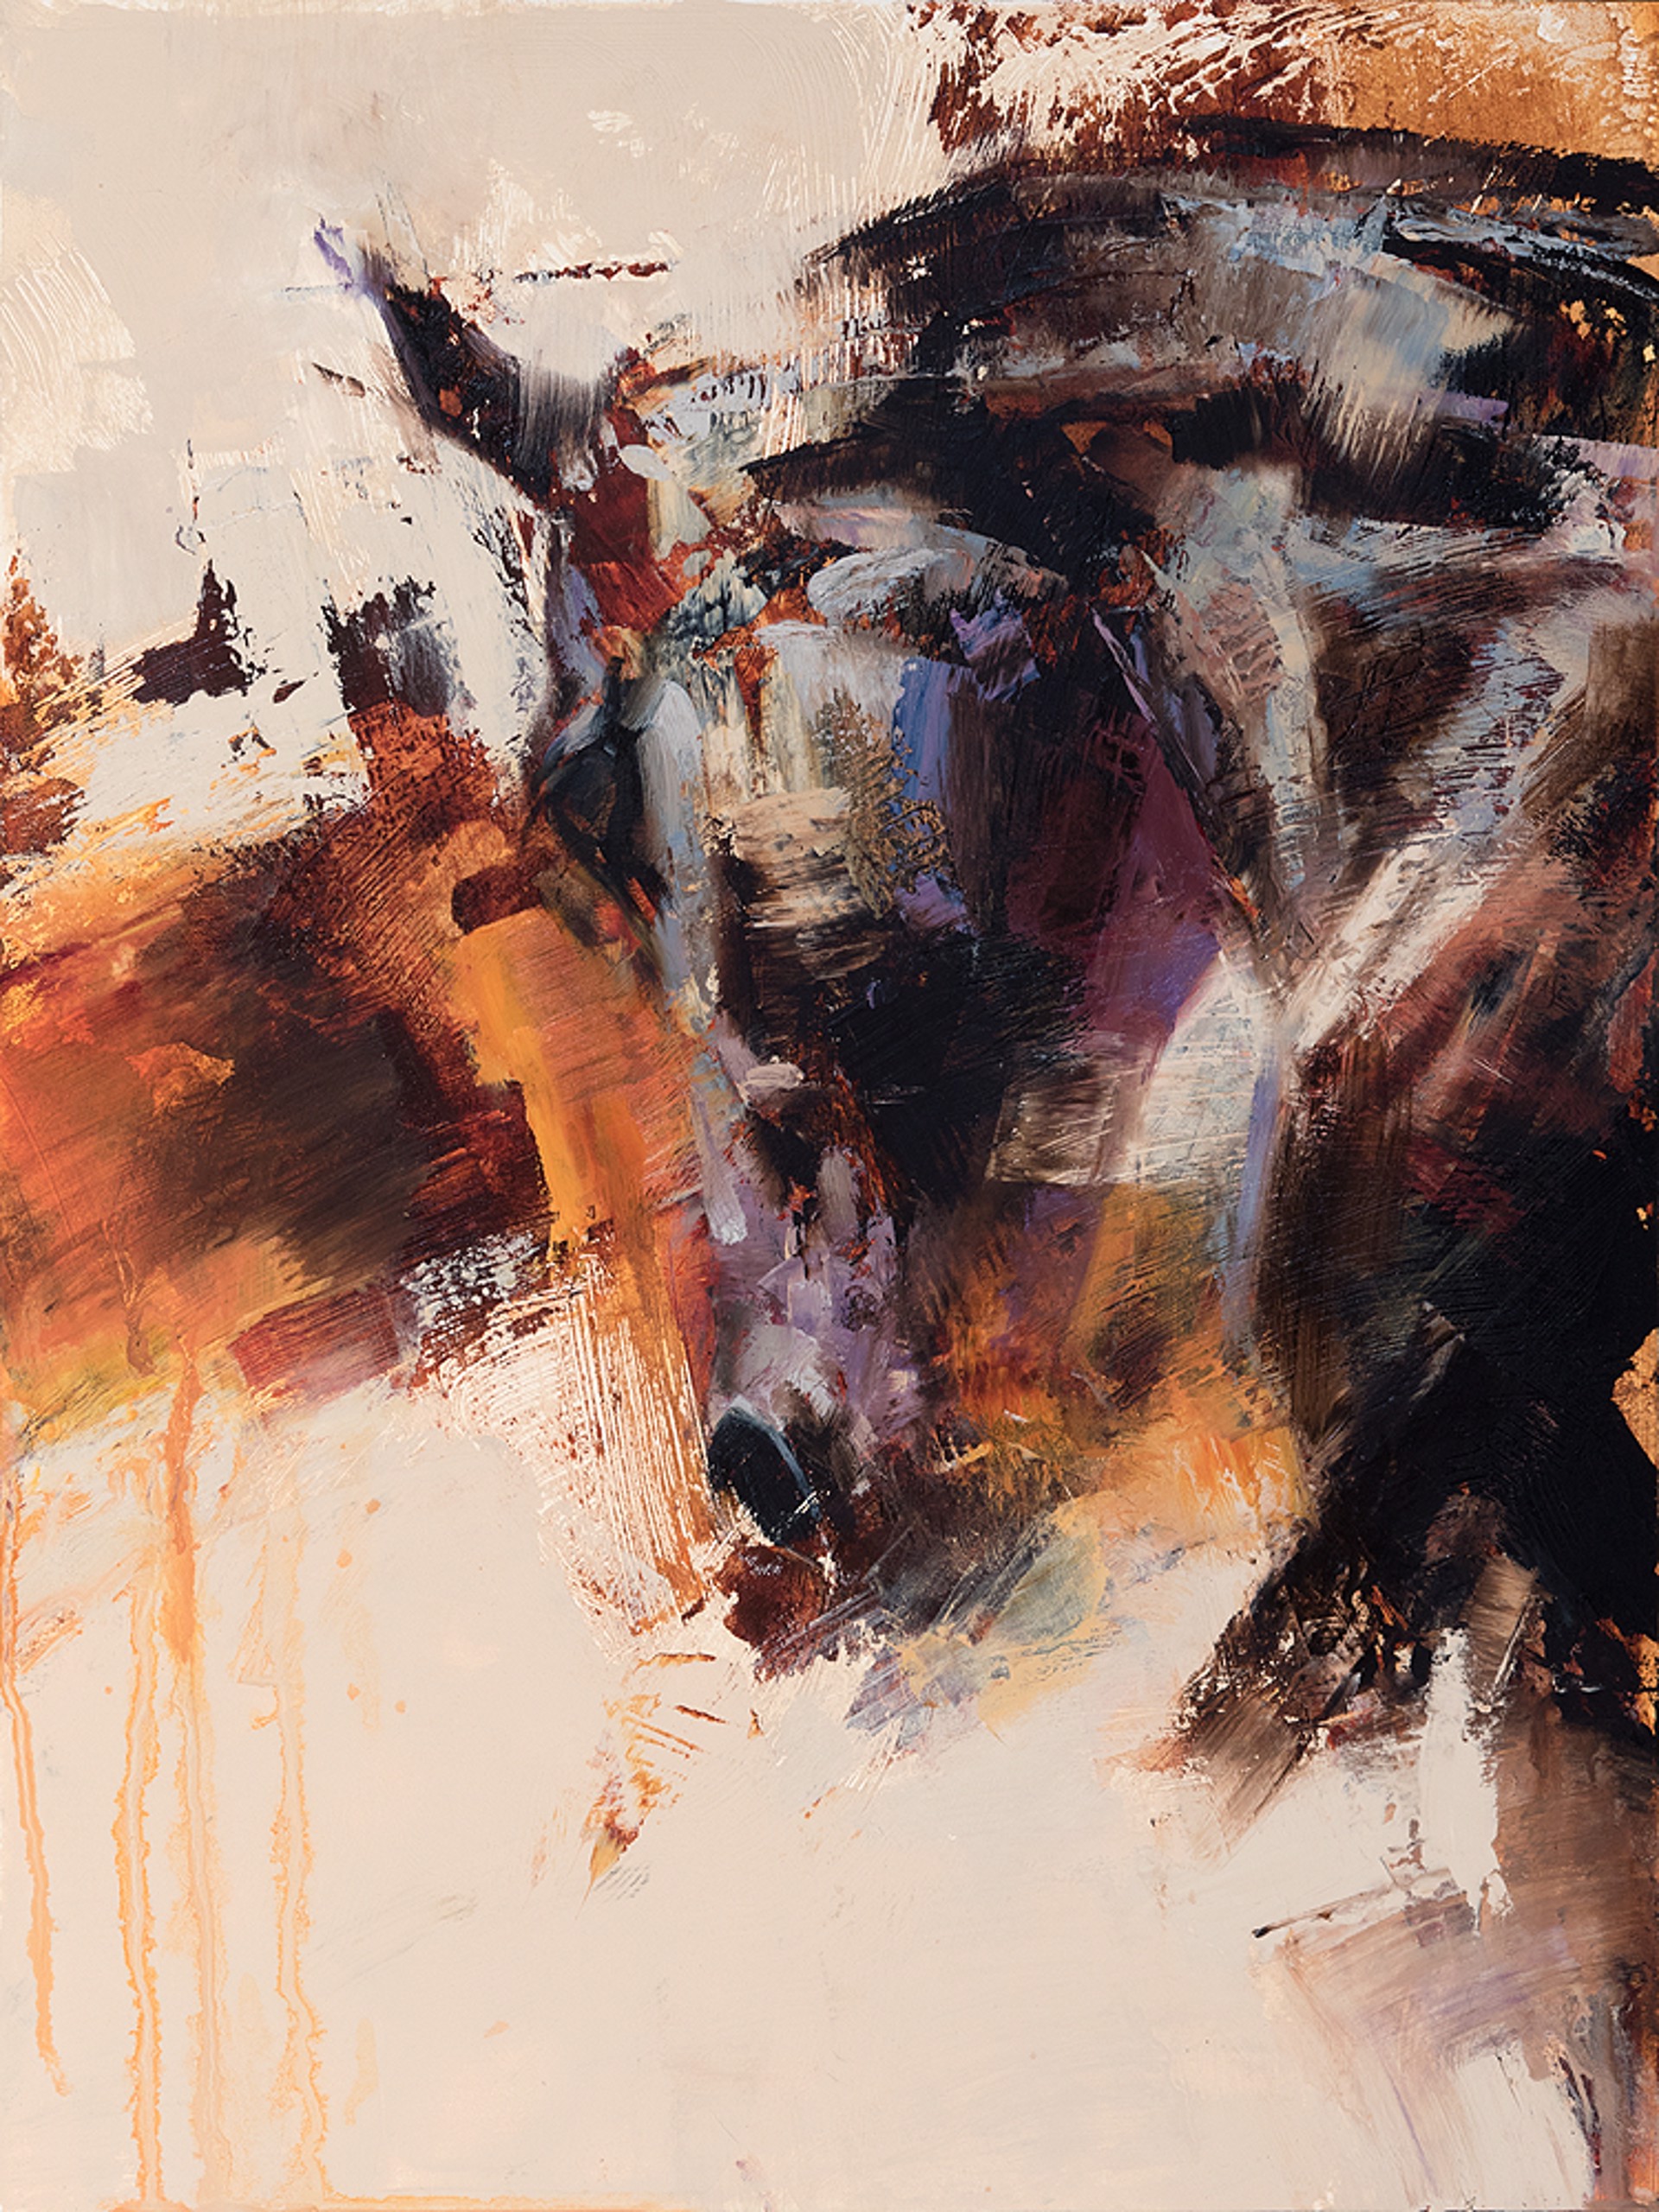 An Original Painting Of A Profile View Of A Horses Head In A Abstract Contemporary Style Featuring Large Brush Strokes, By Julie Chapman